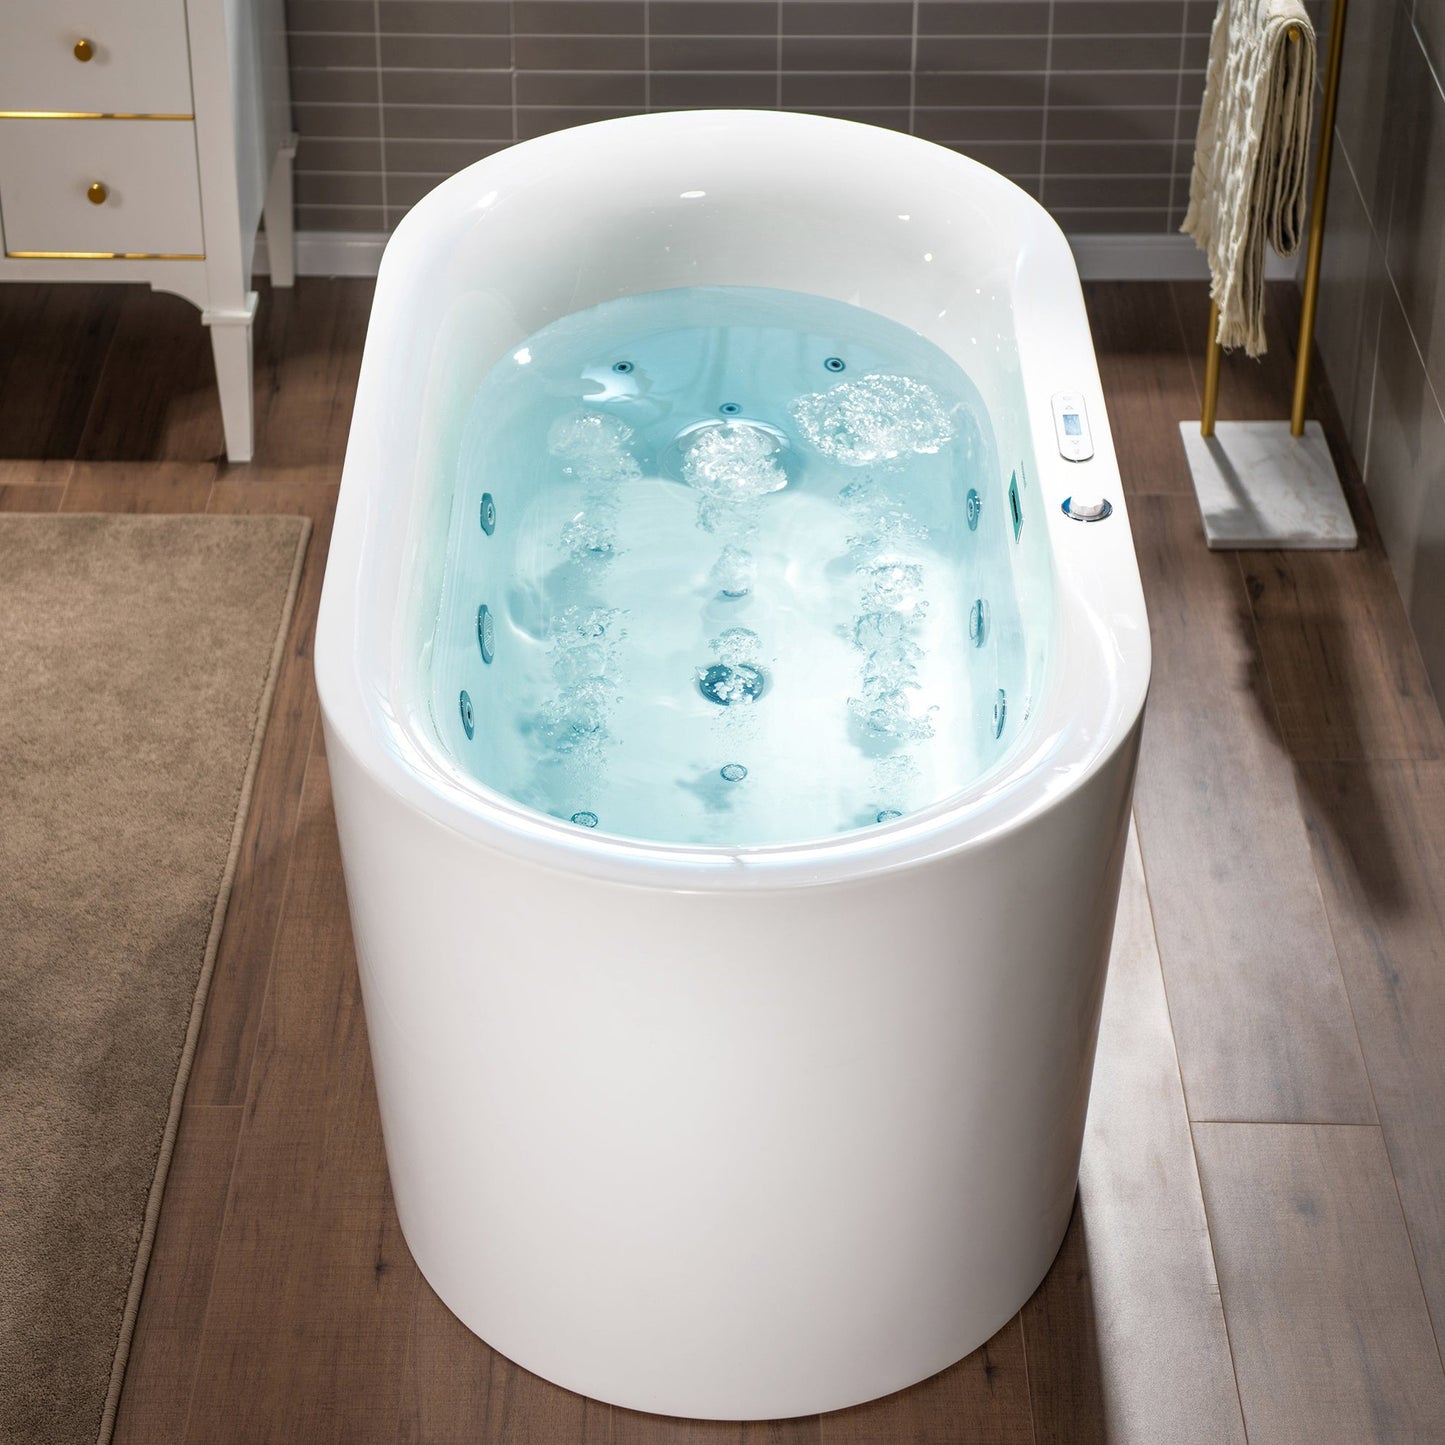 WoodBridge 72" White Whirlpool and Air Bath Heated Soaking Combination Tub With Adjustable Speed Air Blower and Display Control Panel